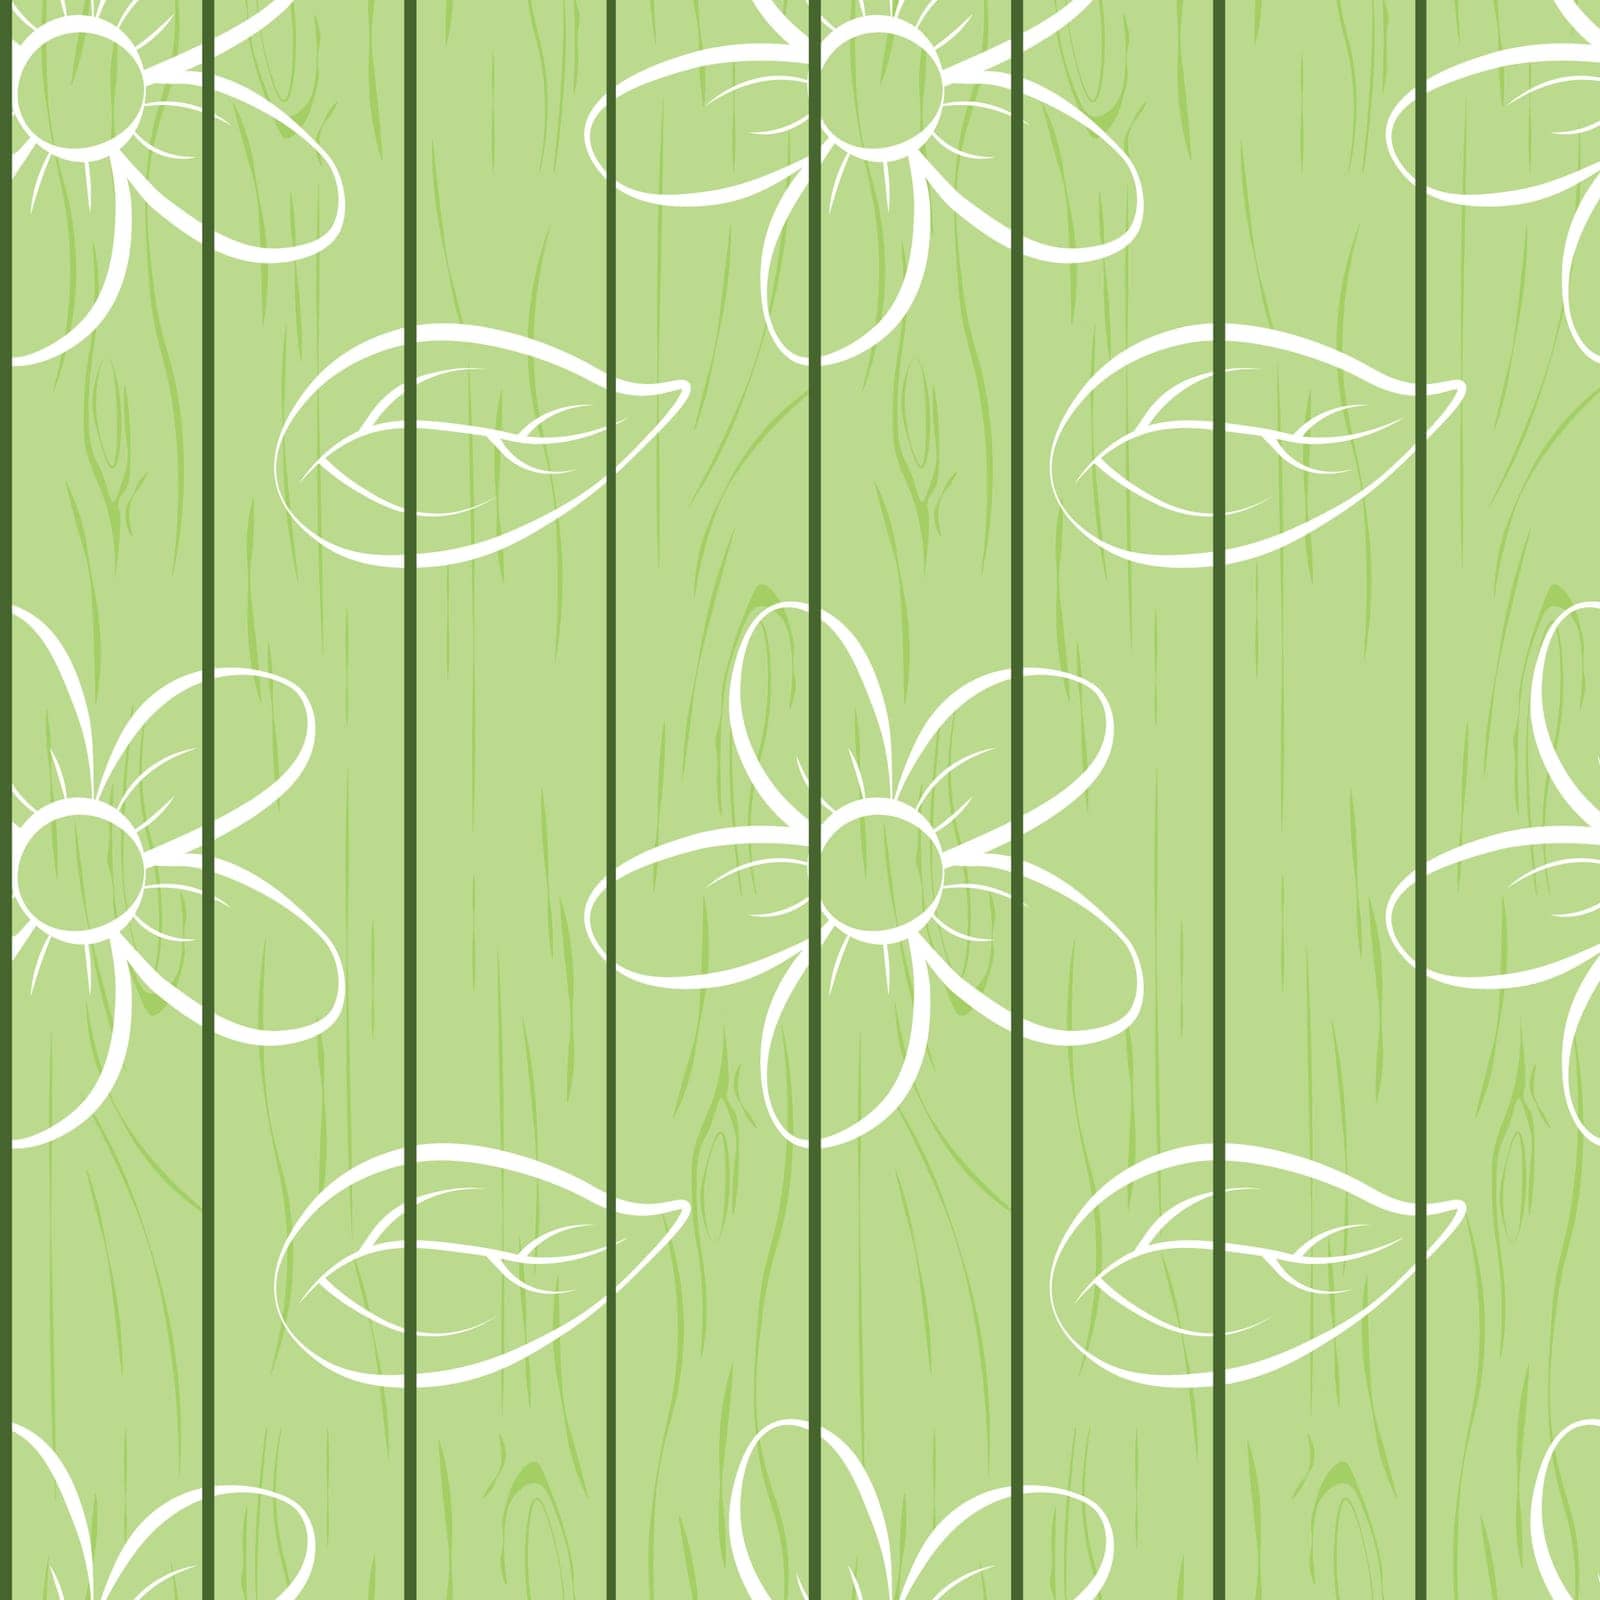 Flowers on the board pattern. Seamless pattern with the image of flowers and leaves hand-painted on the fence. Sketch on a green background. Floral pattern. Vector illustration.